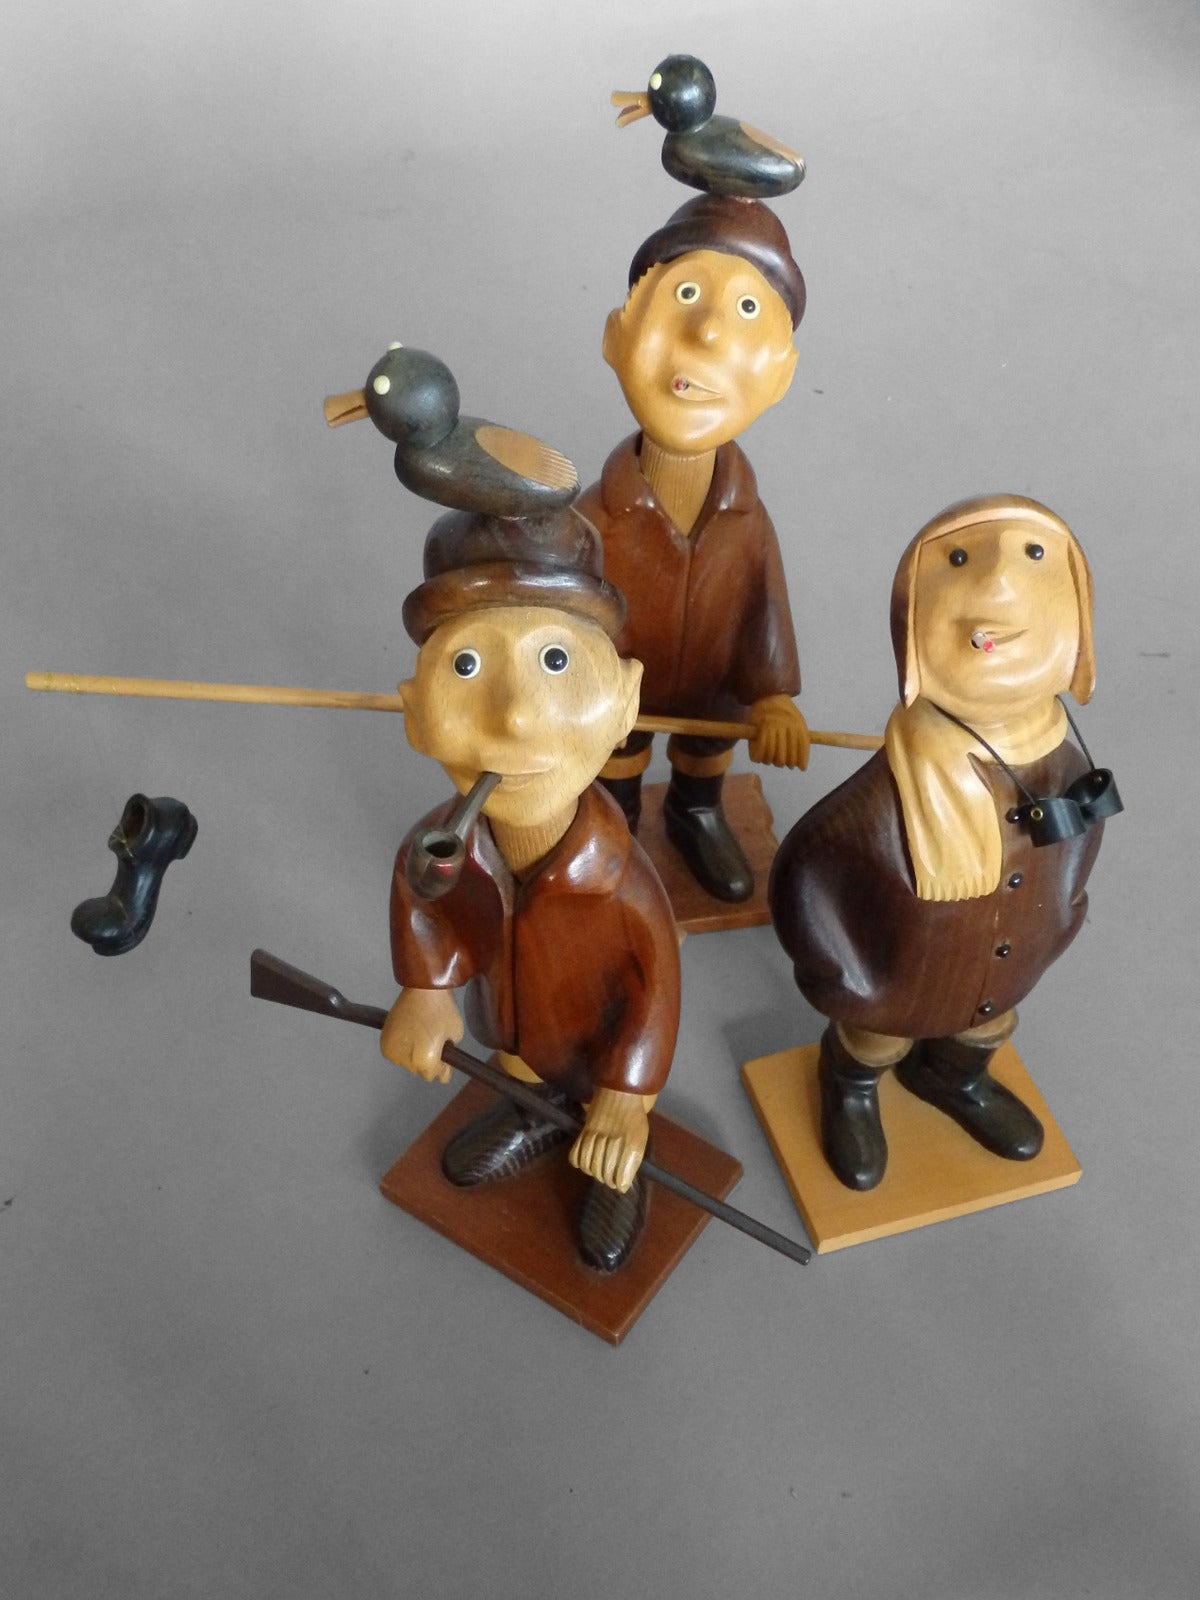 Carved wood collection bankers, doctors, police, builder, banker, lawyer, golf and tennis players
average measurements: 4.25 wide x 3.25 deep x 12.5 tall.